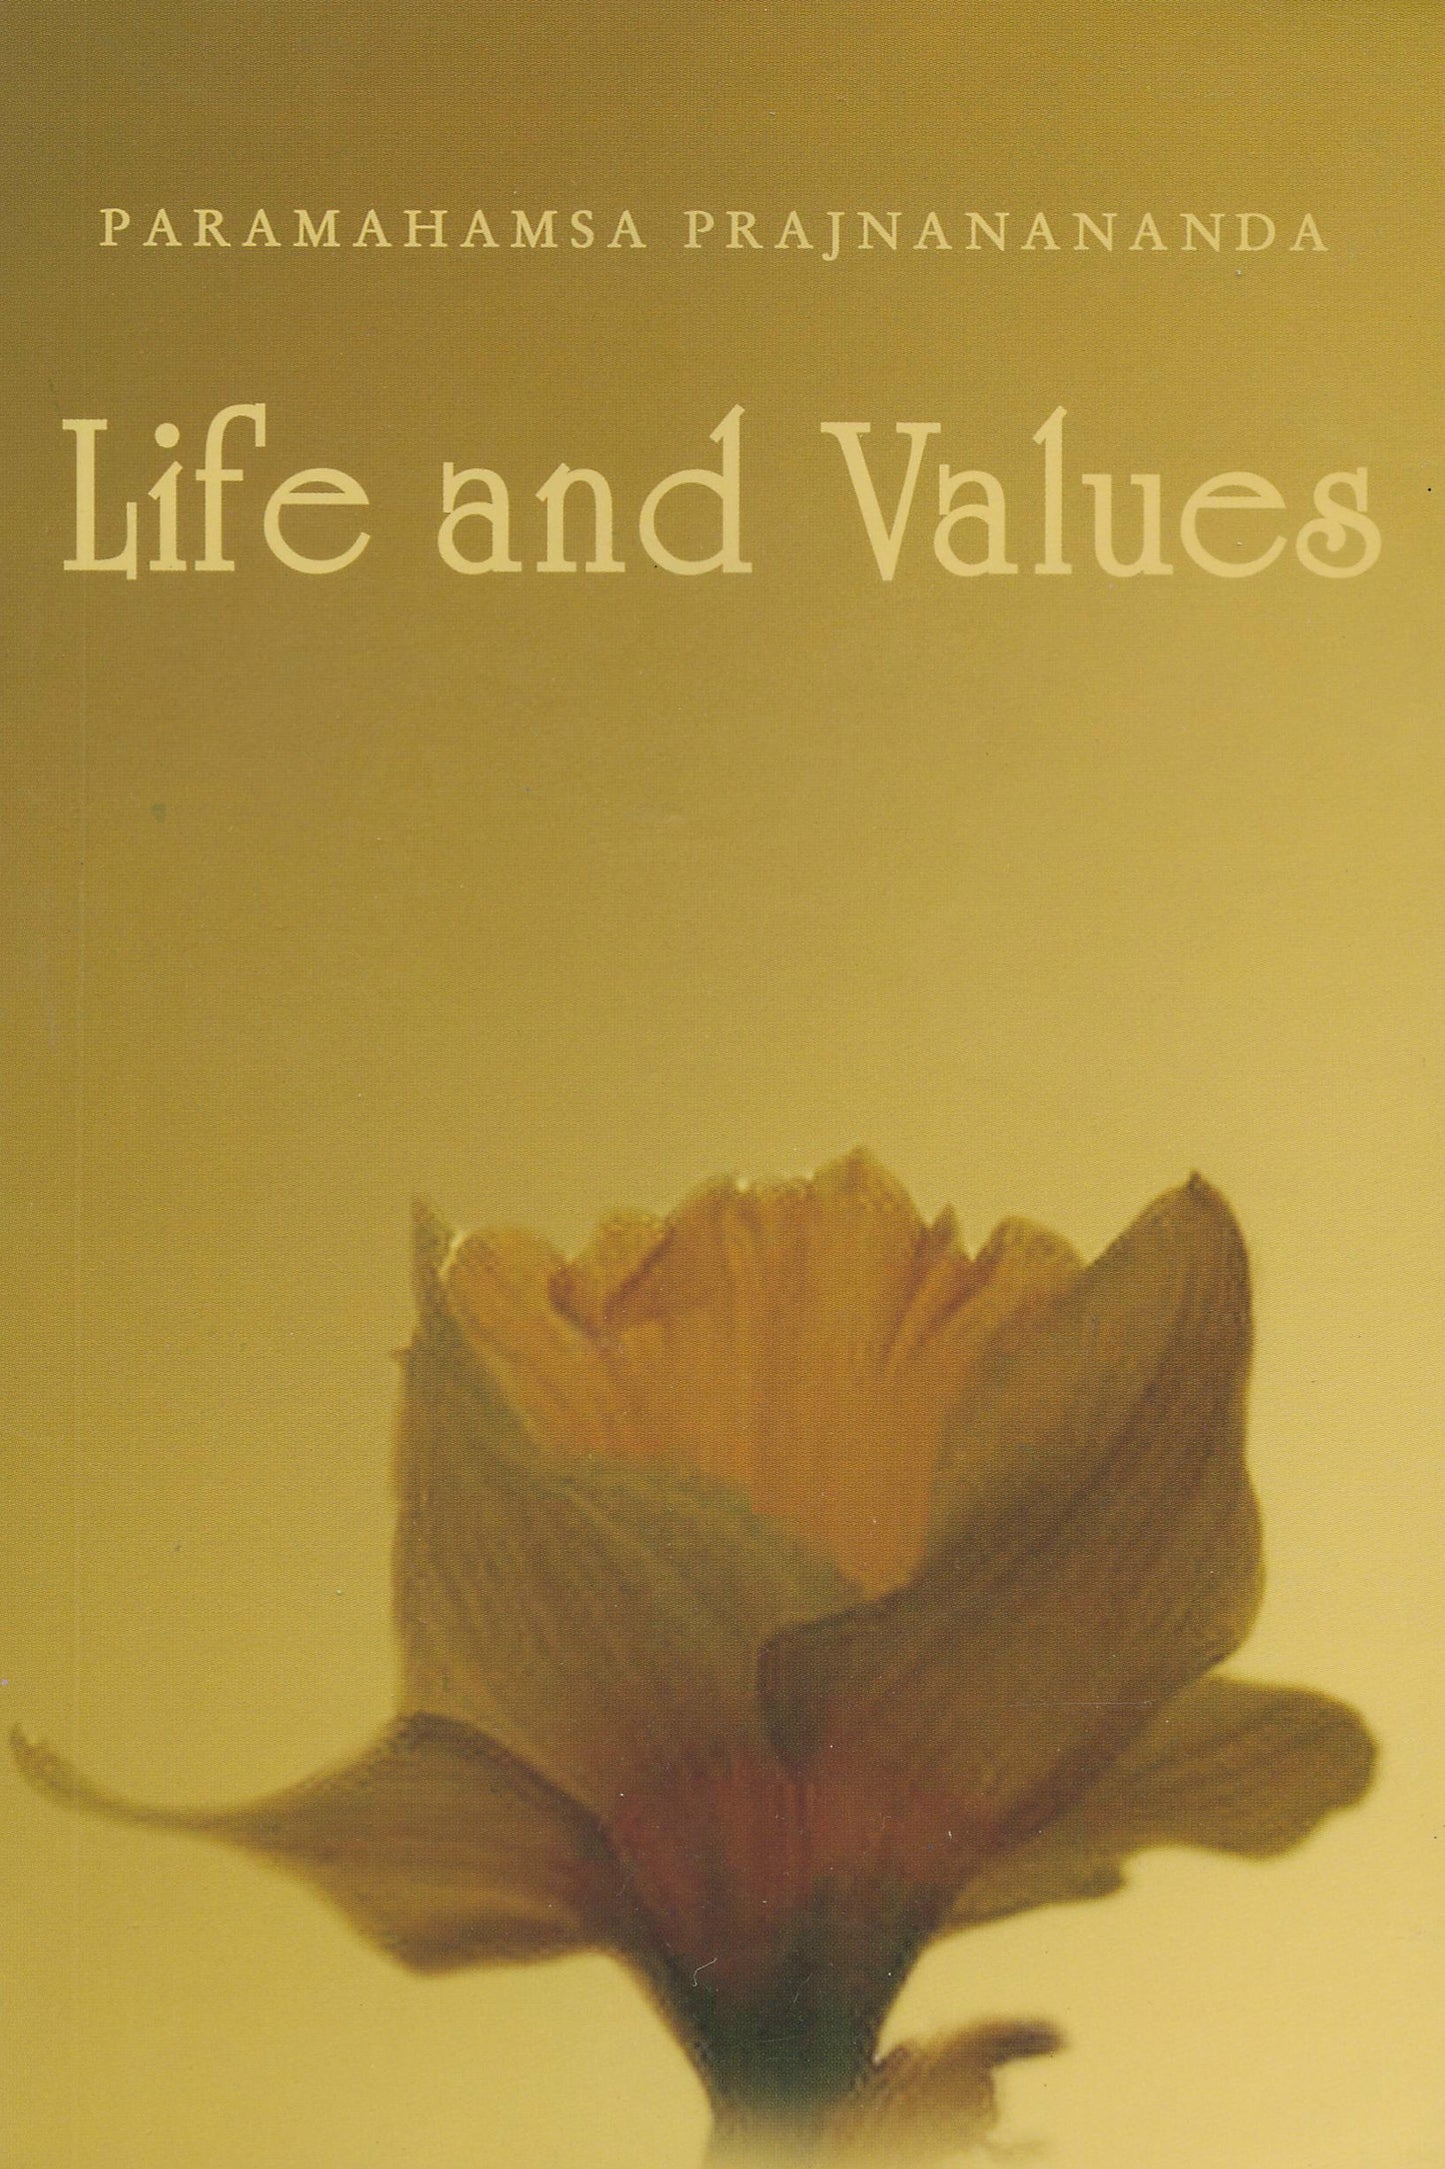 Life and Values